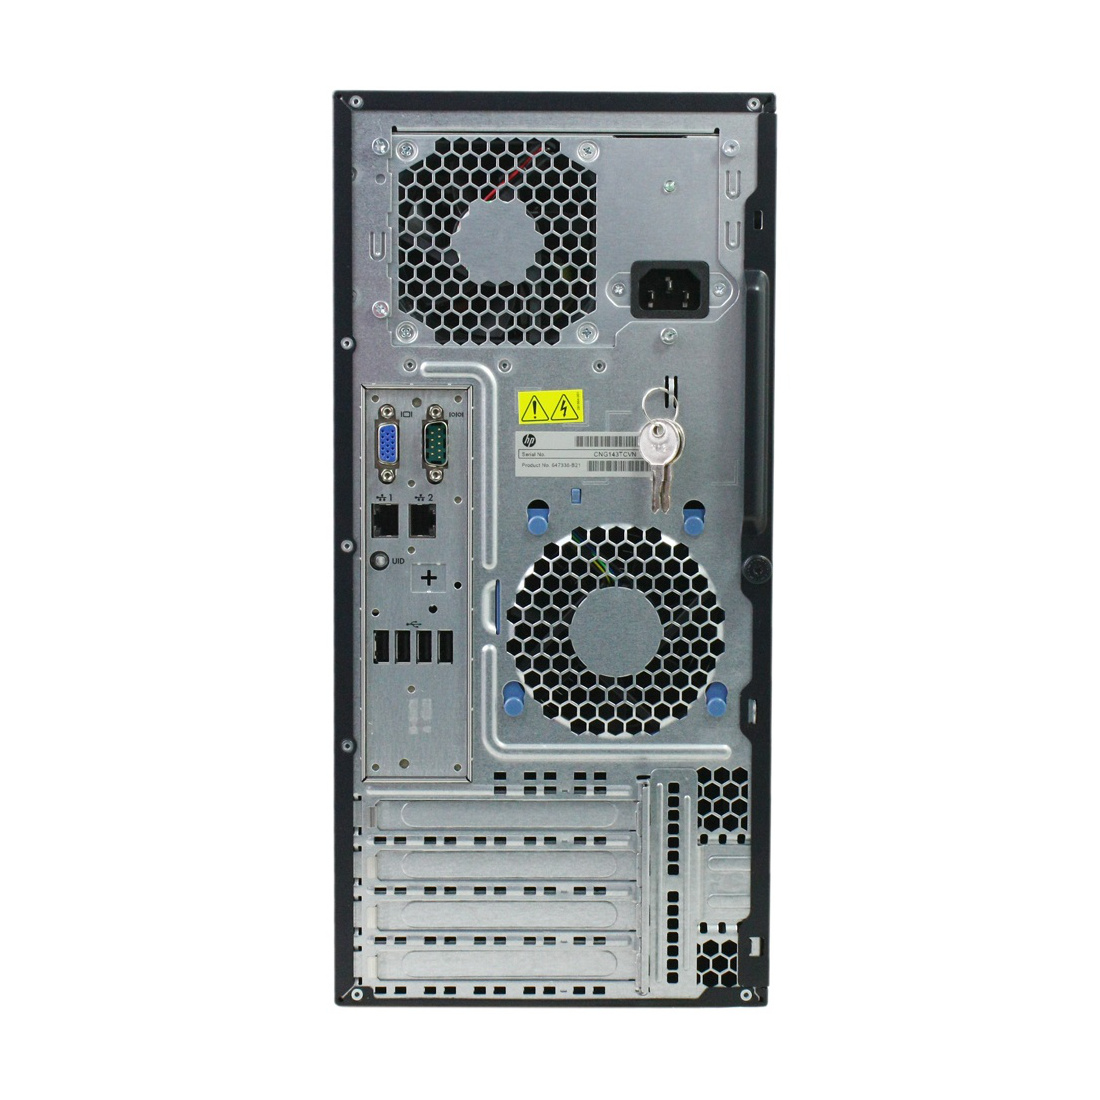 hp proliant ml110 g7 linux install software